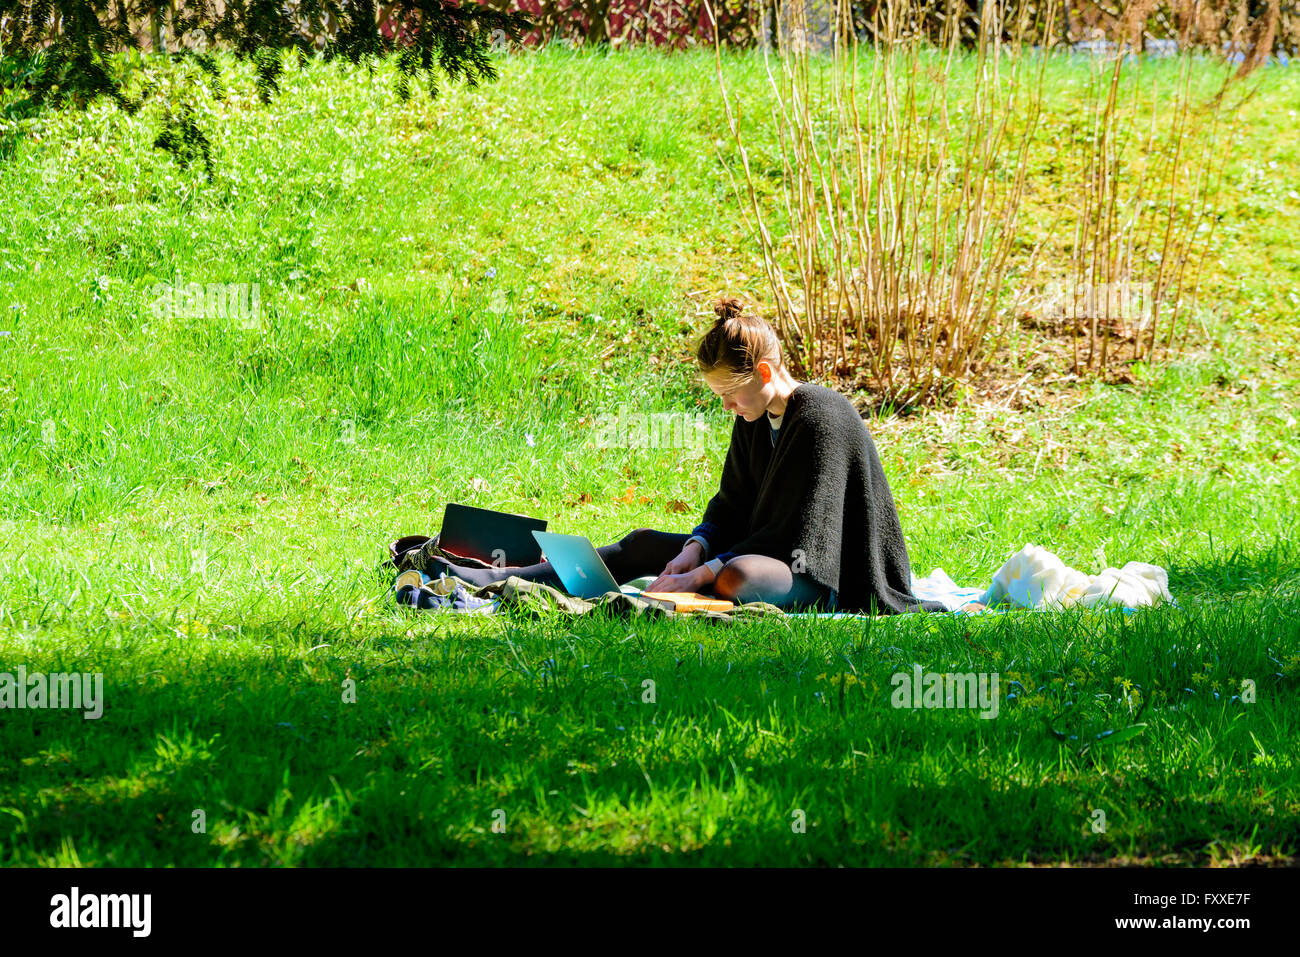 Lund, Sweden - April 11, 2016: One young adult woman sitting on a blanket in the grass in the public botanical garden, studying Stock Photo